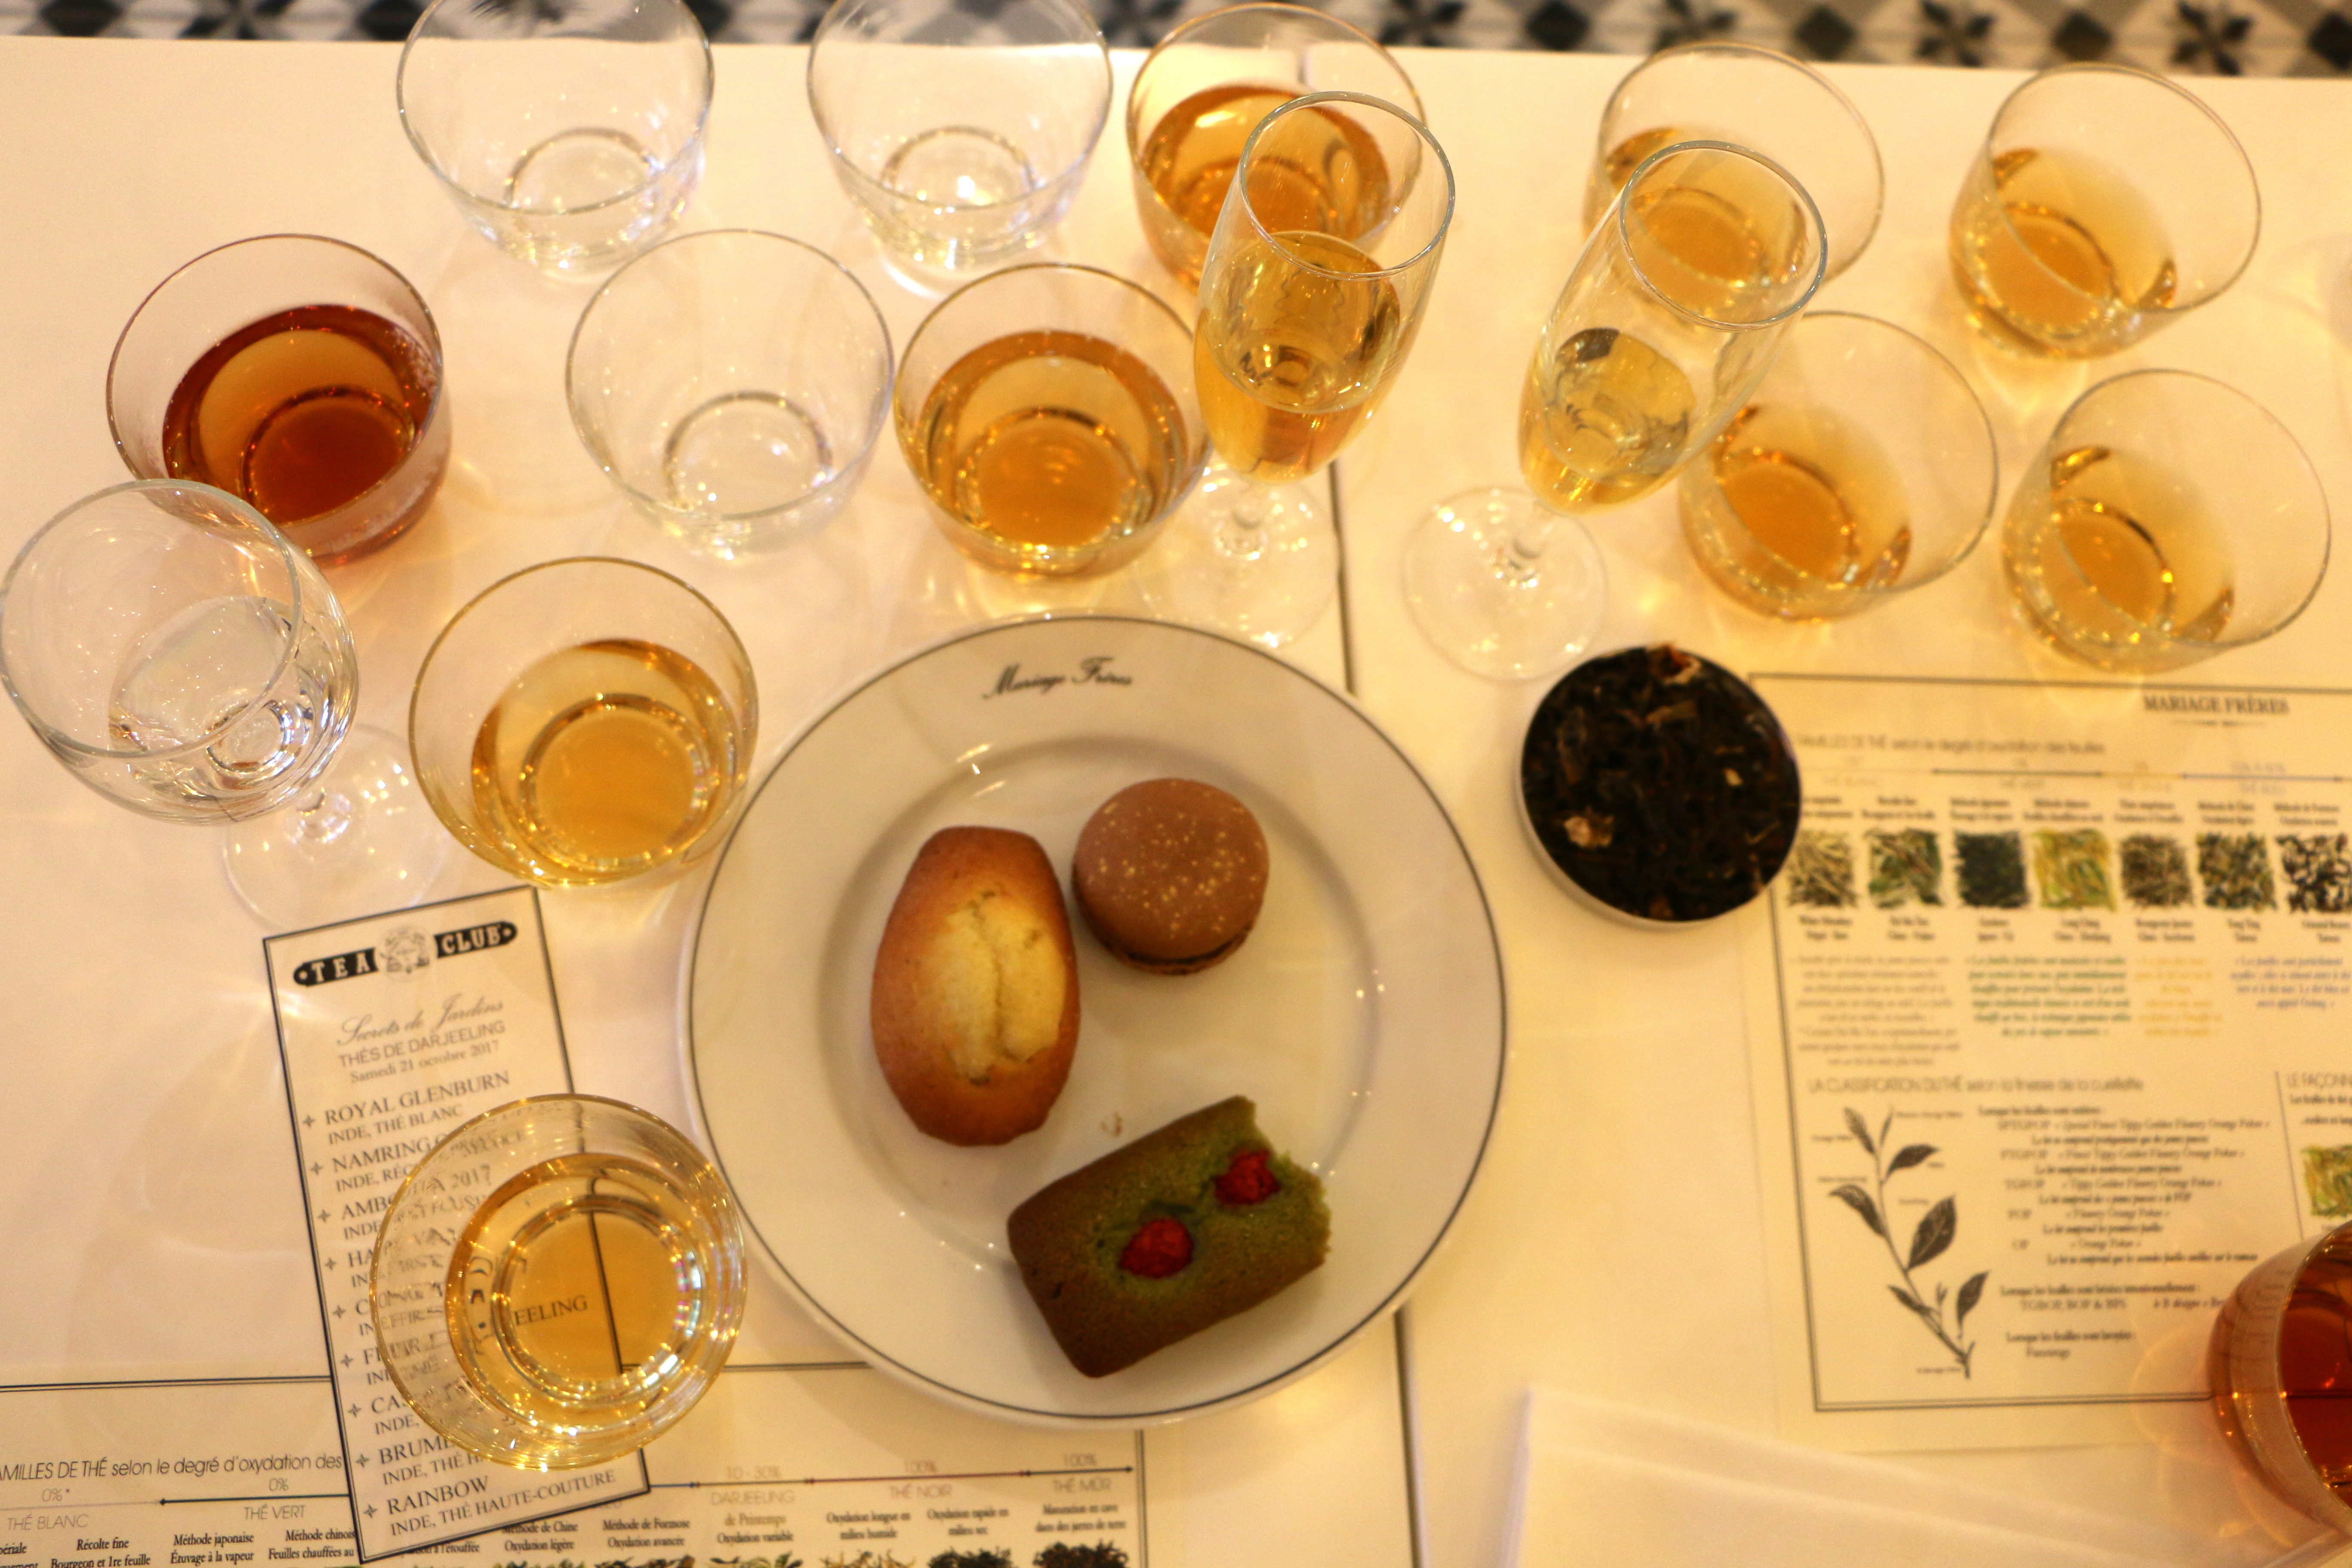 Mariage Frères tea tasting - Agent luxe blog